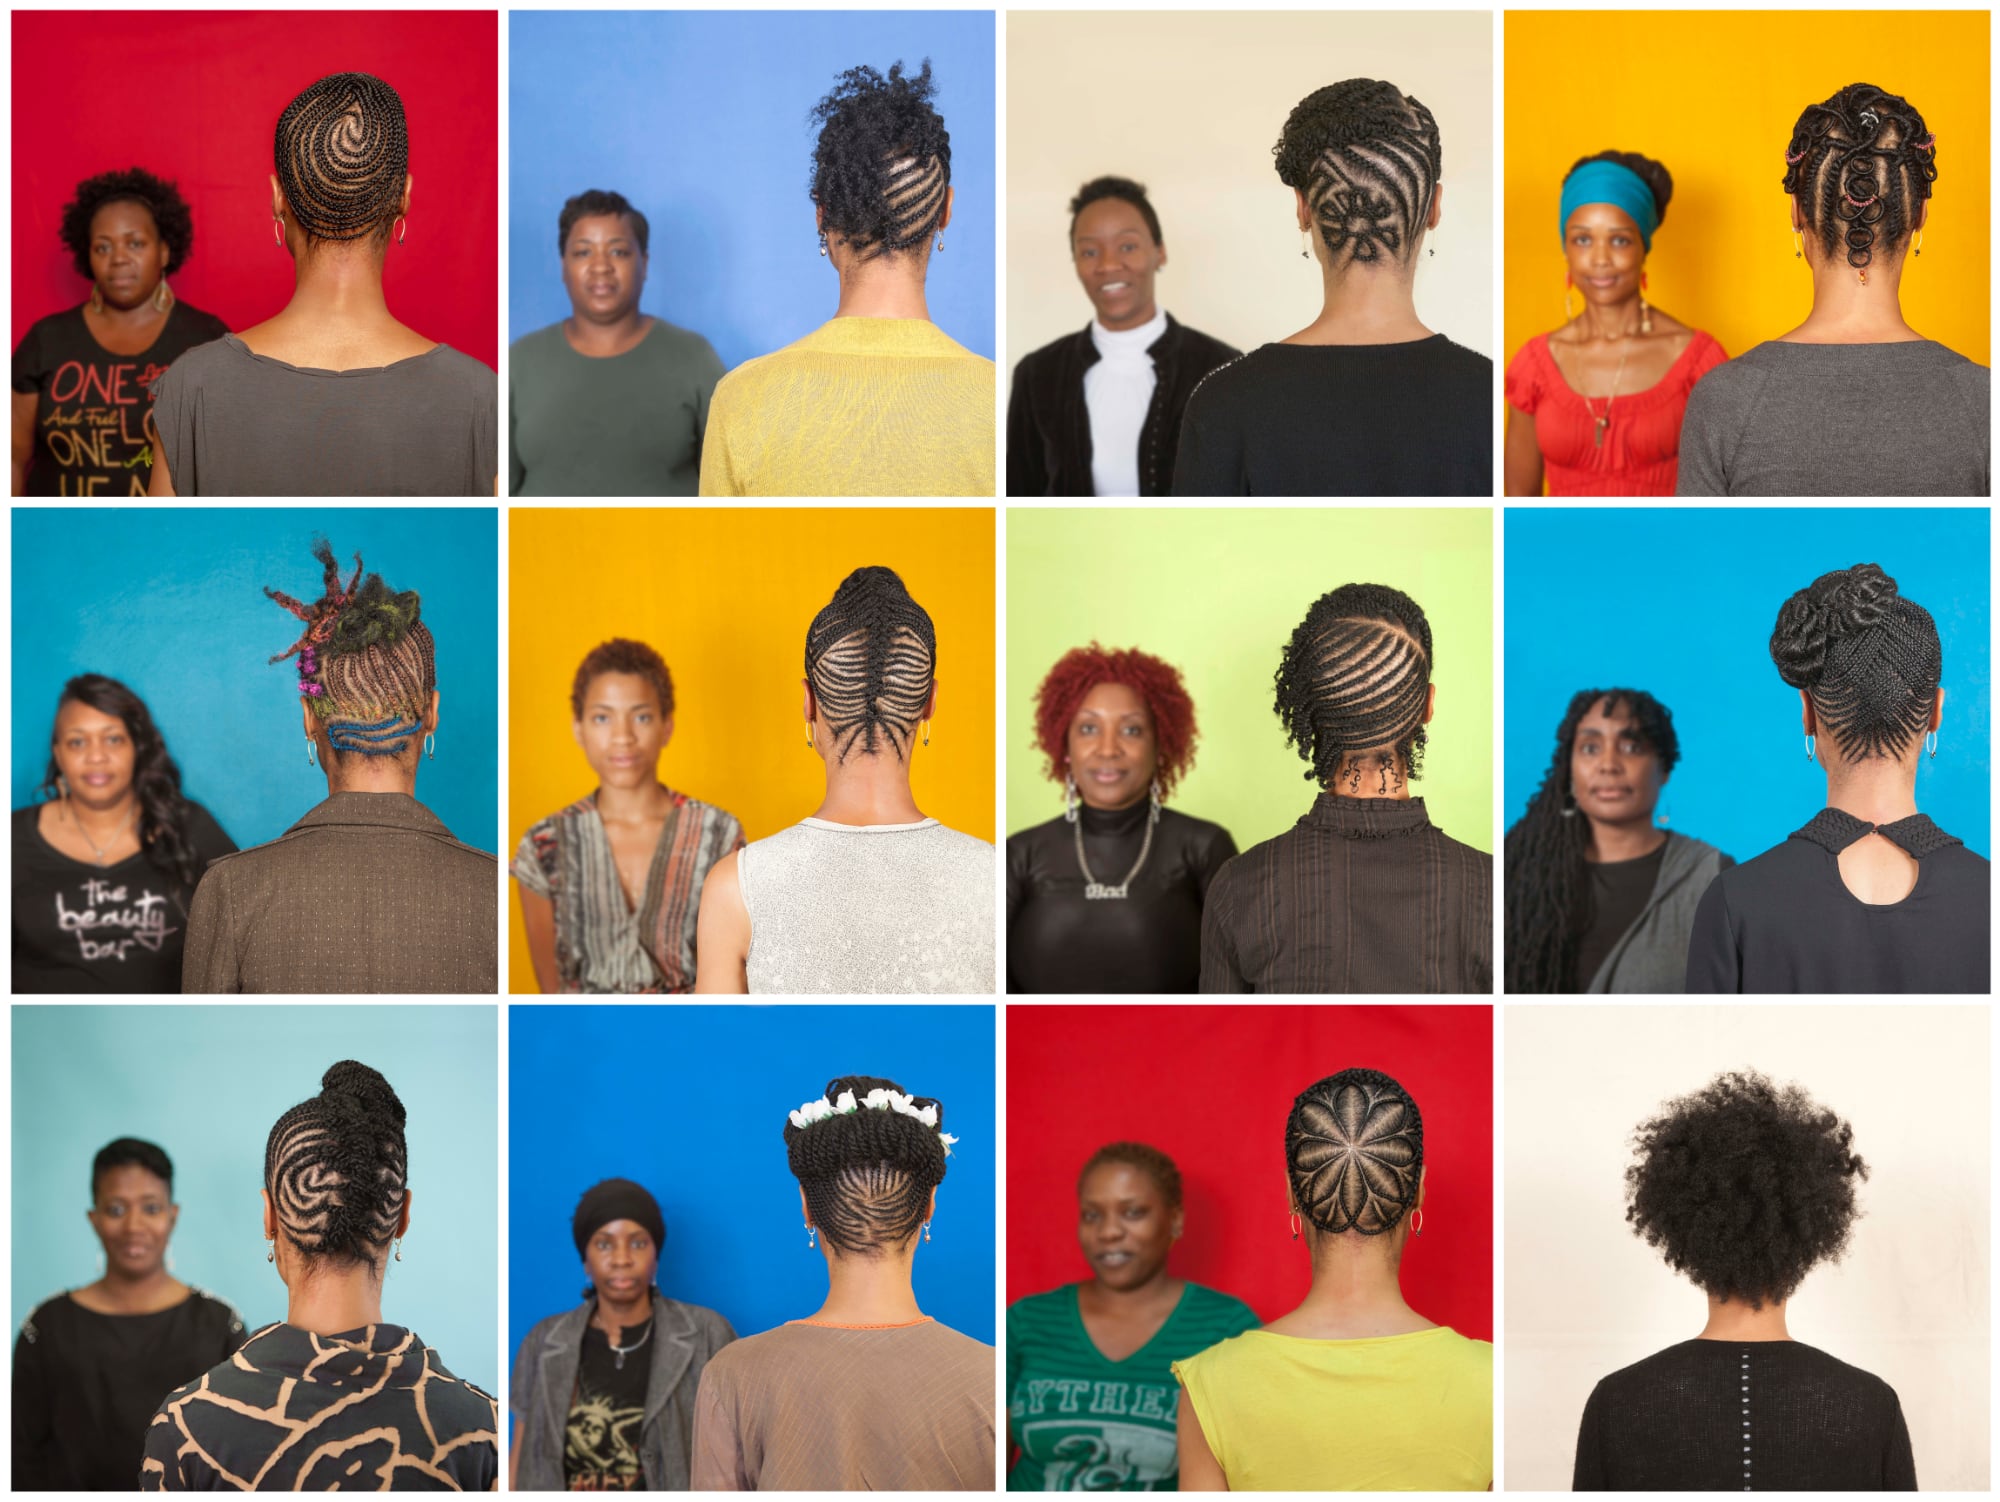 A grid of portraits with one woman with her back turned to the camera and other women blurred in the backdrop